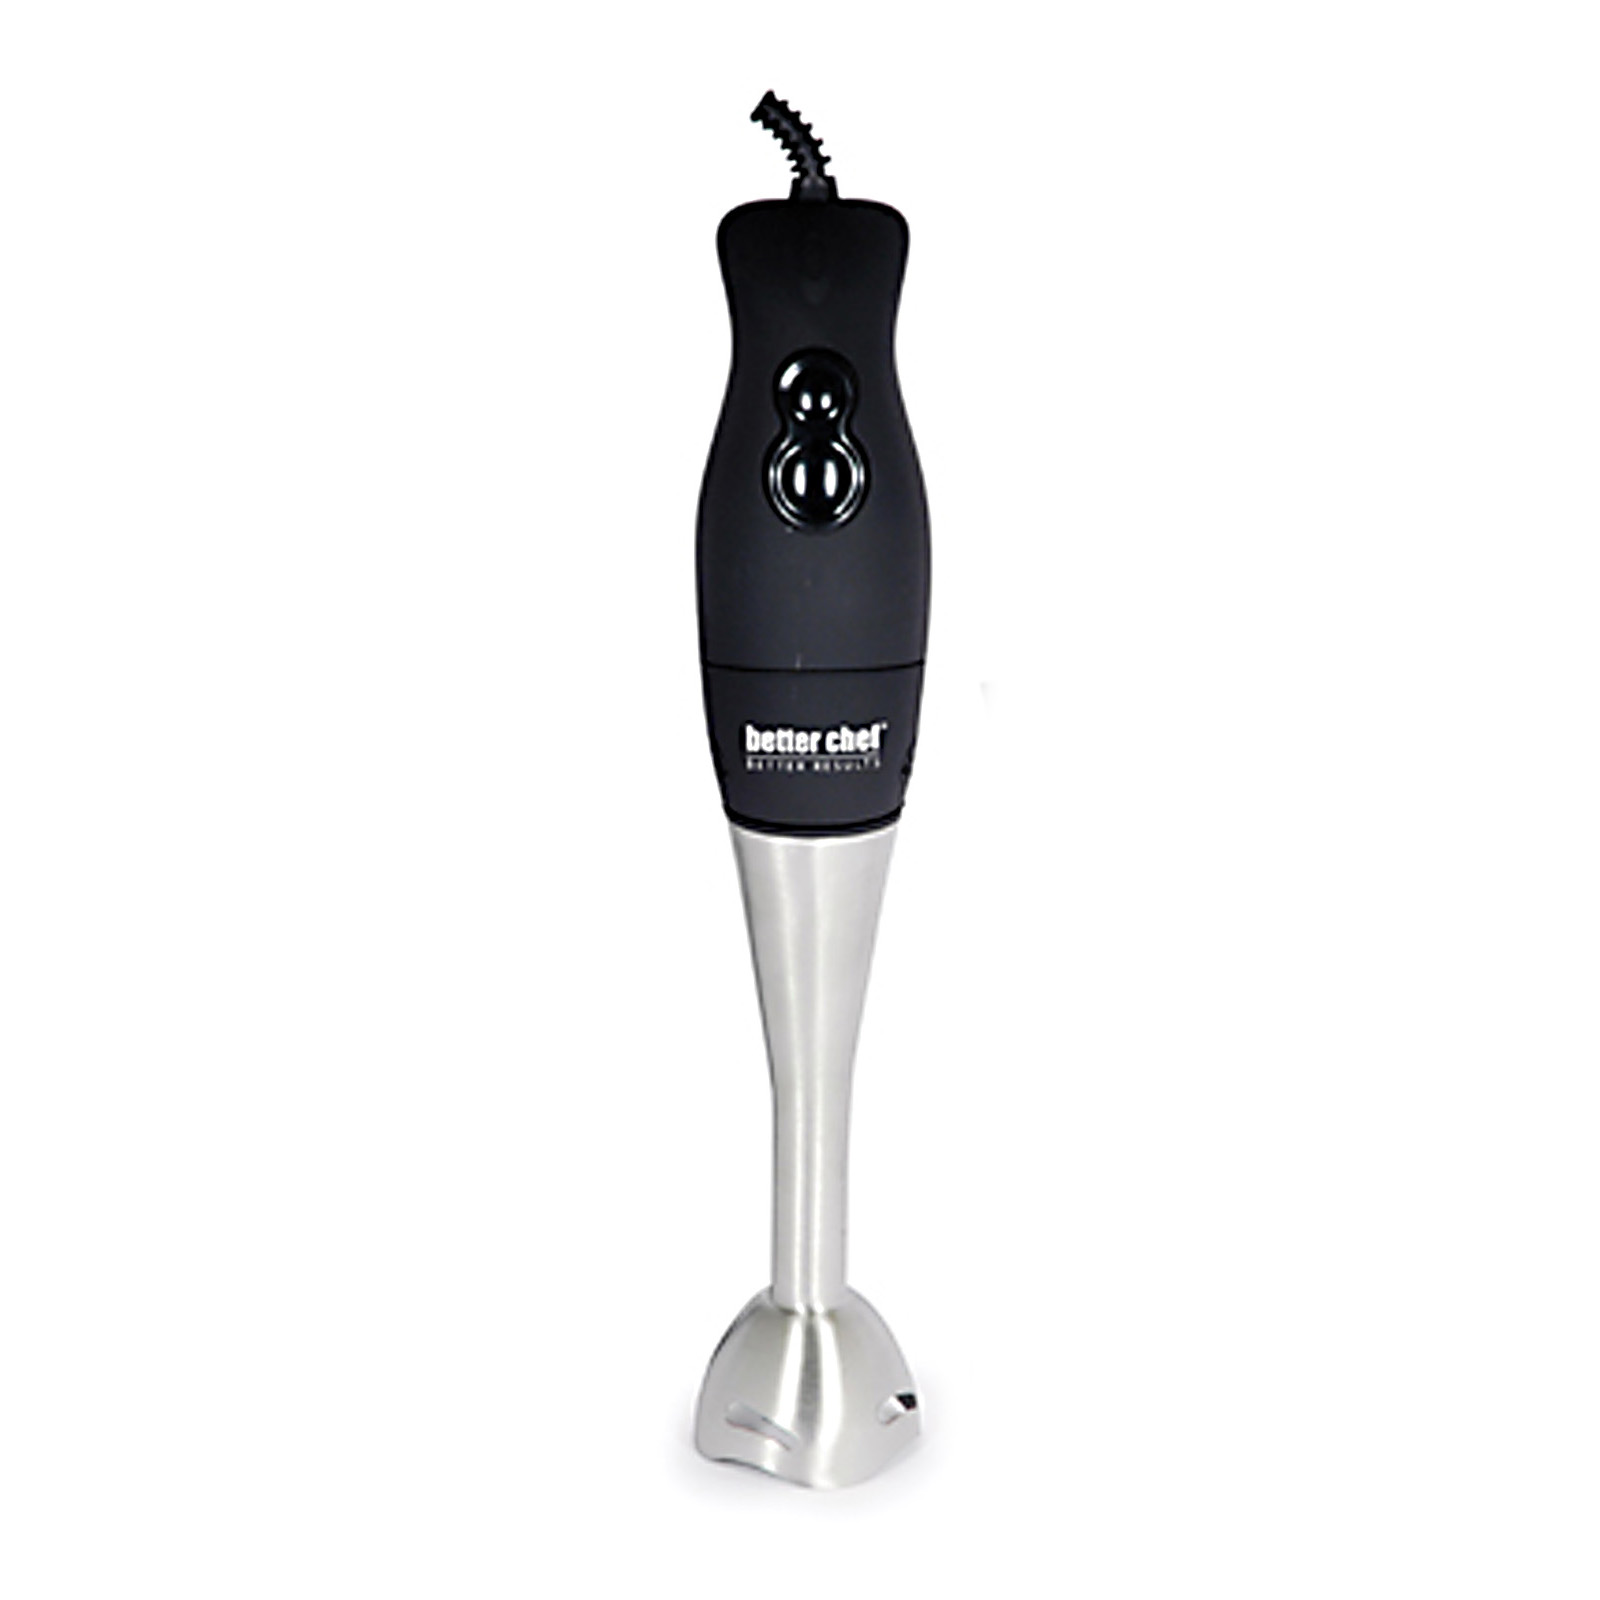 Better Chef 97075870M  DualPro Handheld Immersion Blender/Hand Mixer